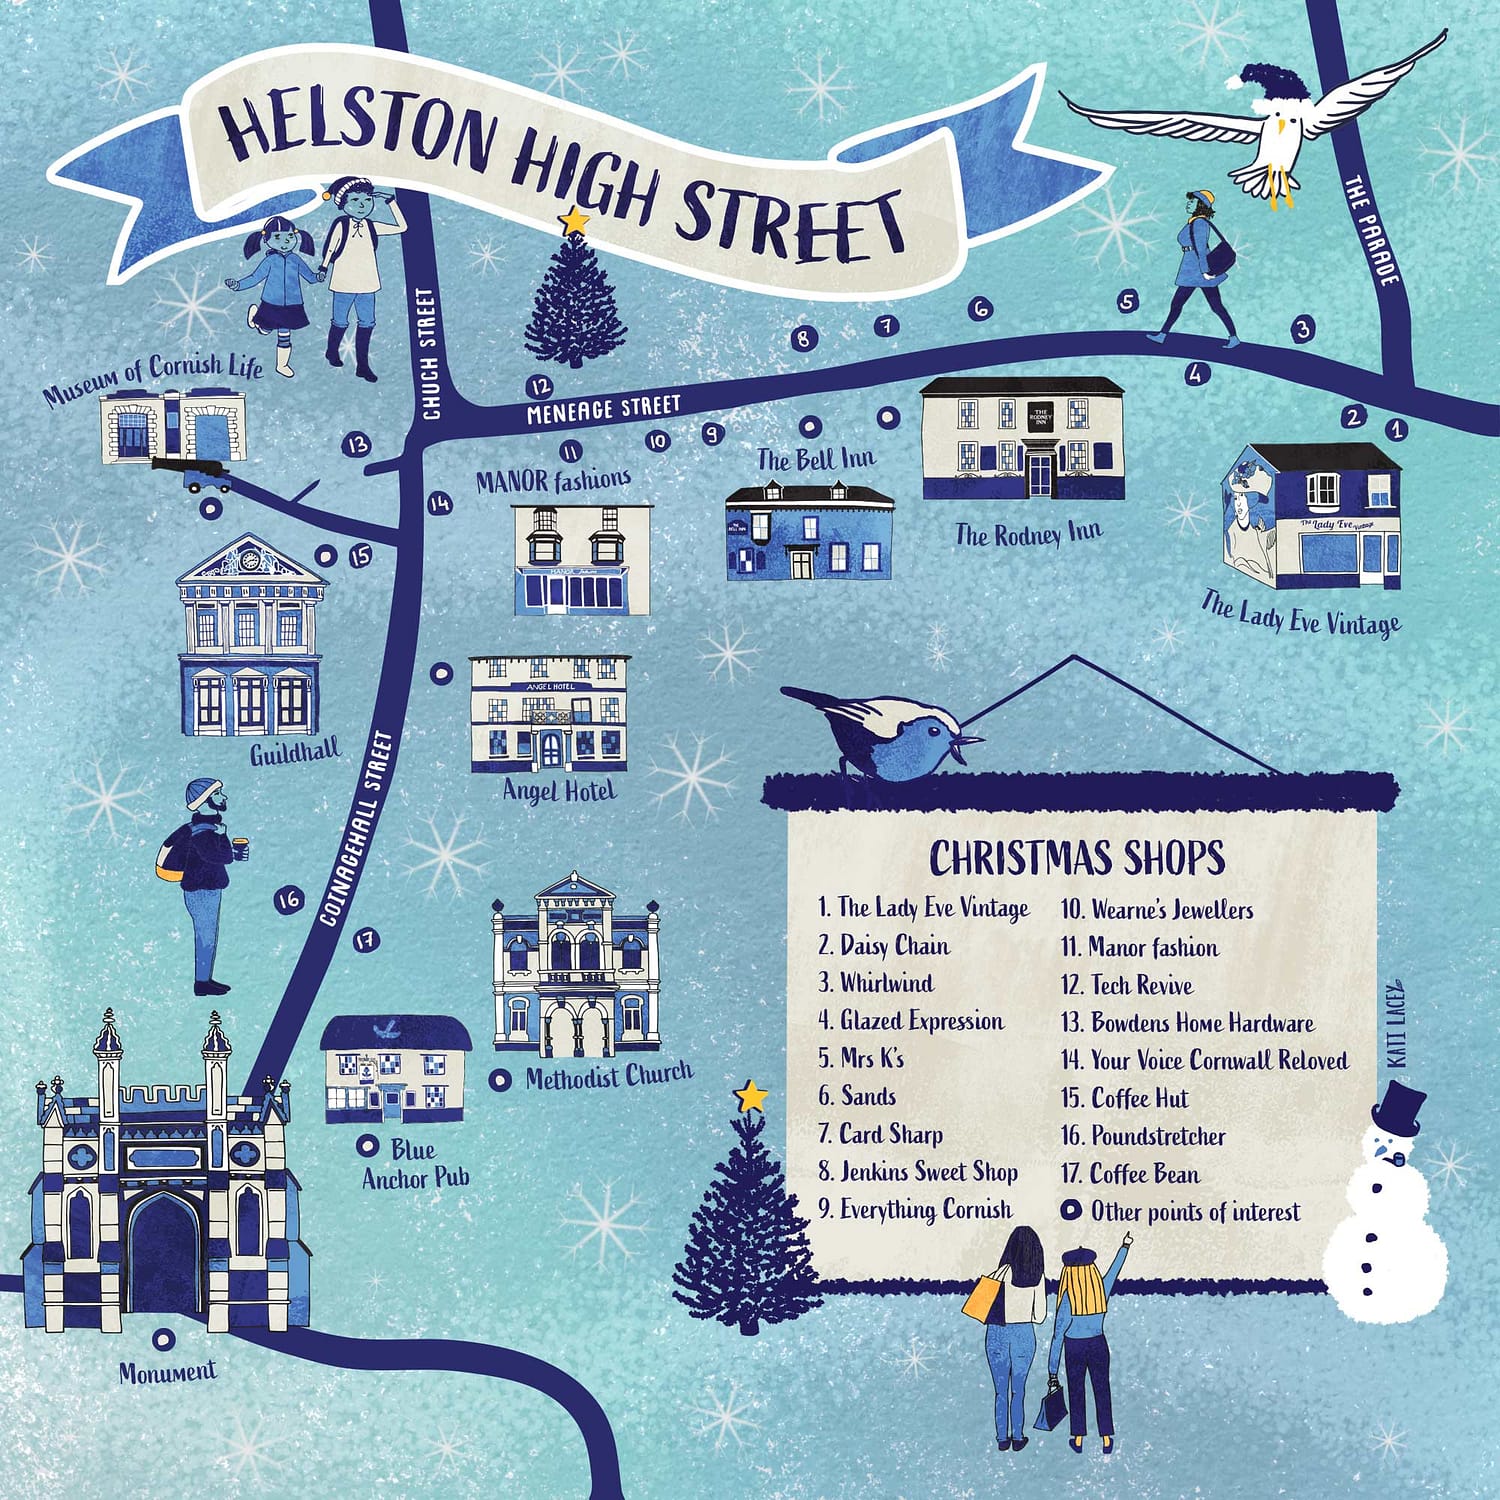 Helston-High-Street-Map-Illustration-by-Kati-Lacey-Illustrator-and-designer showing 10 iconnic buildings, people and Christmas festivities